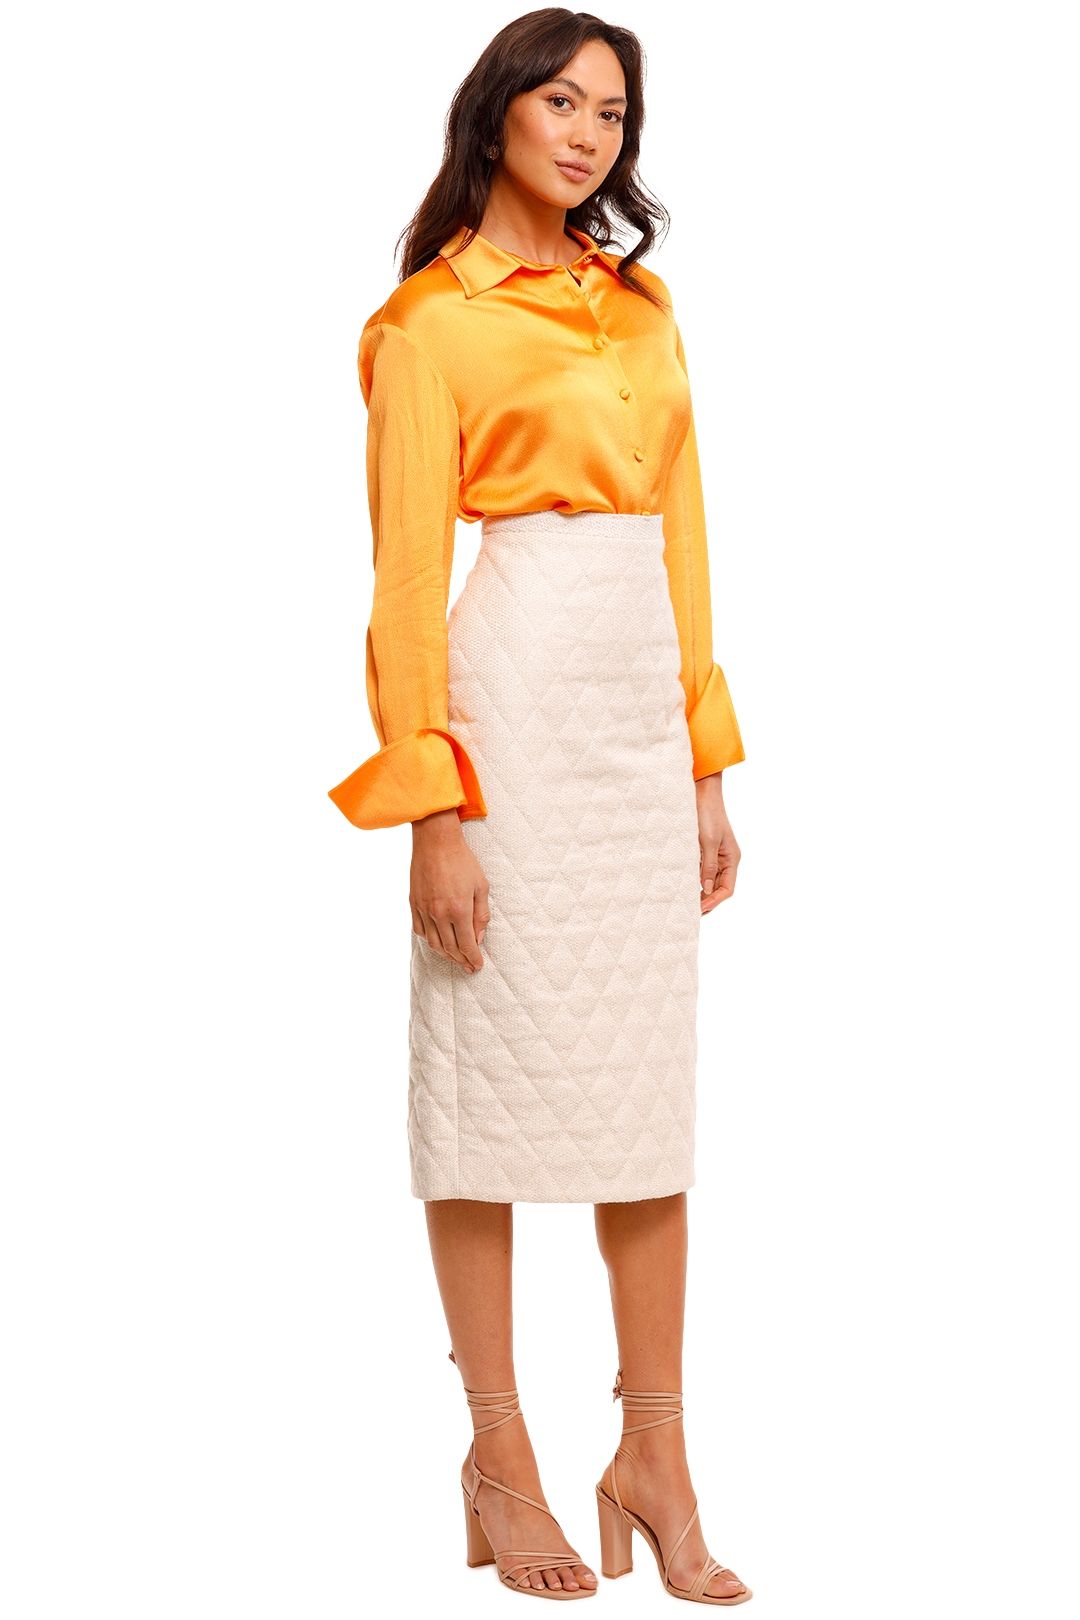 C&M Camilla And Marc Ace Skirt